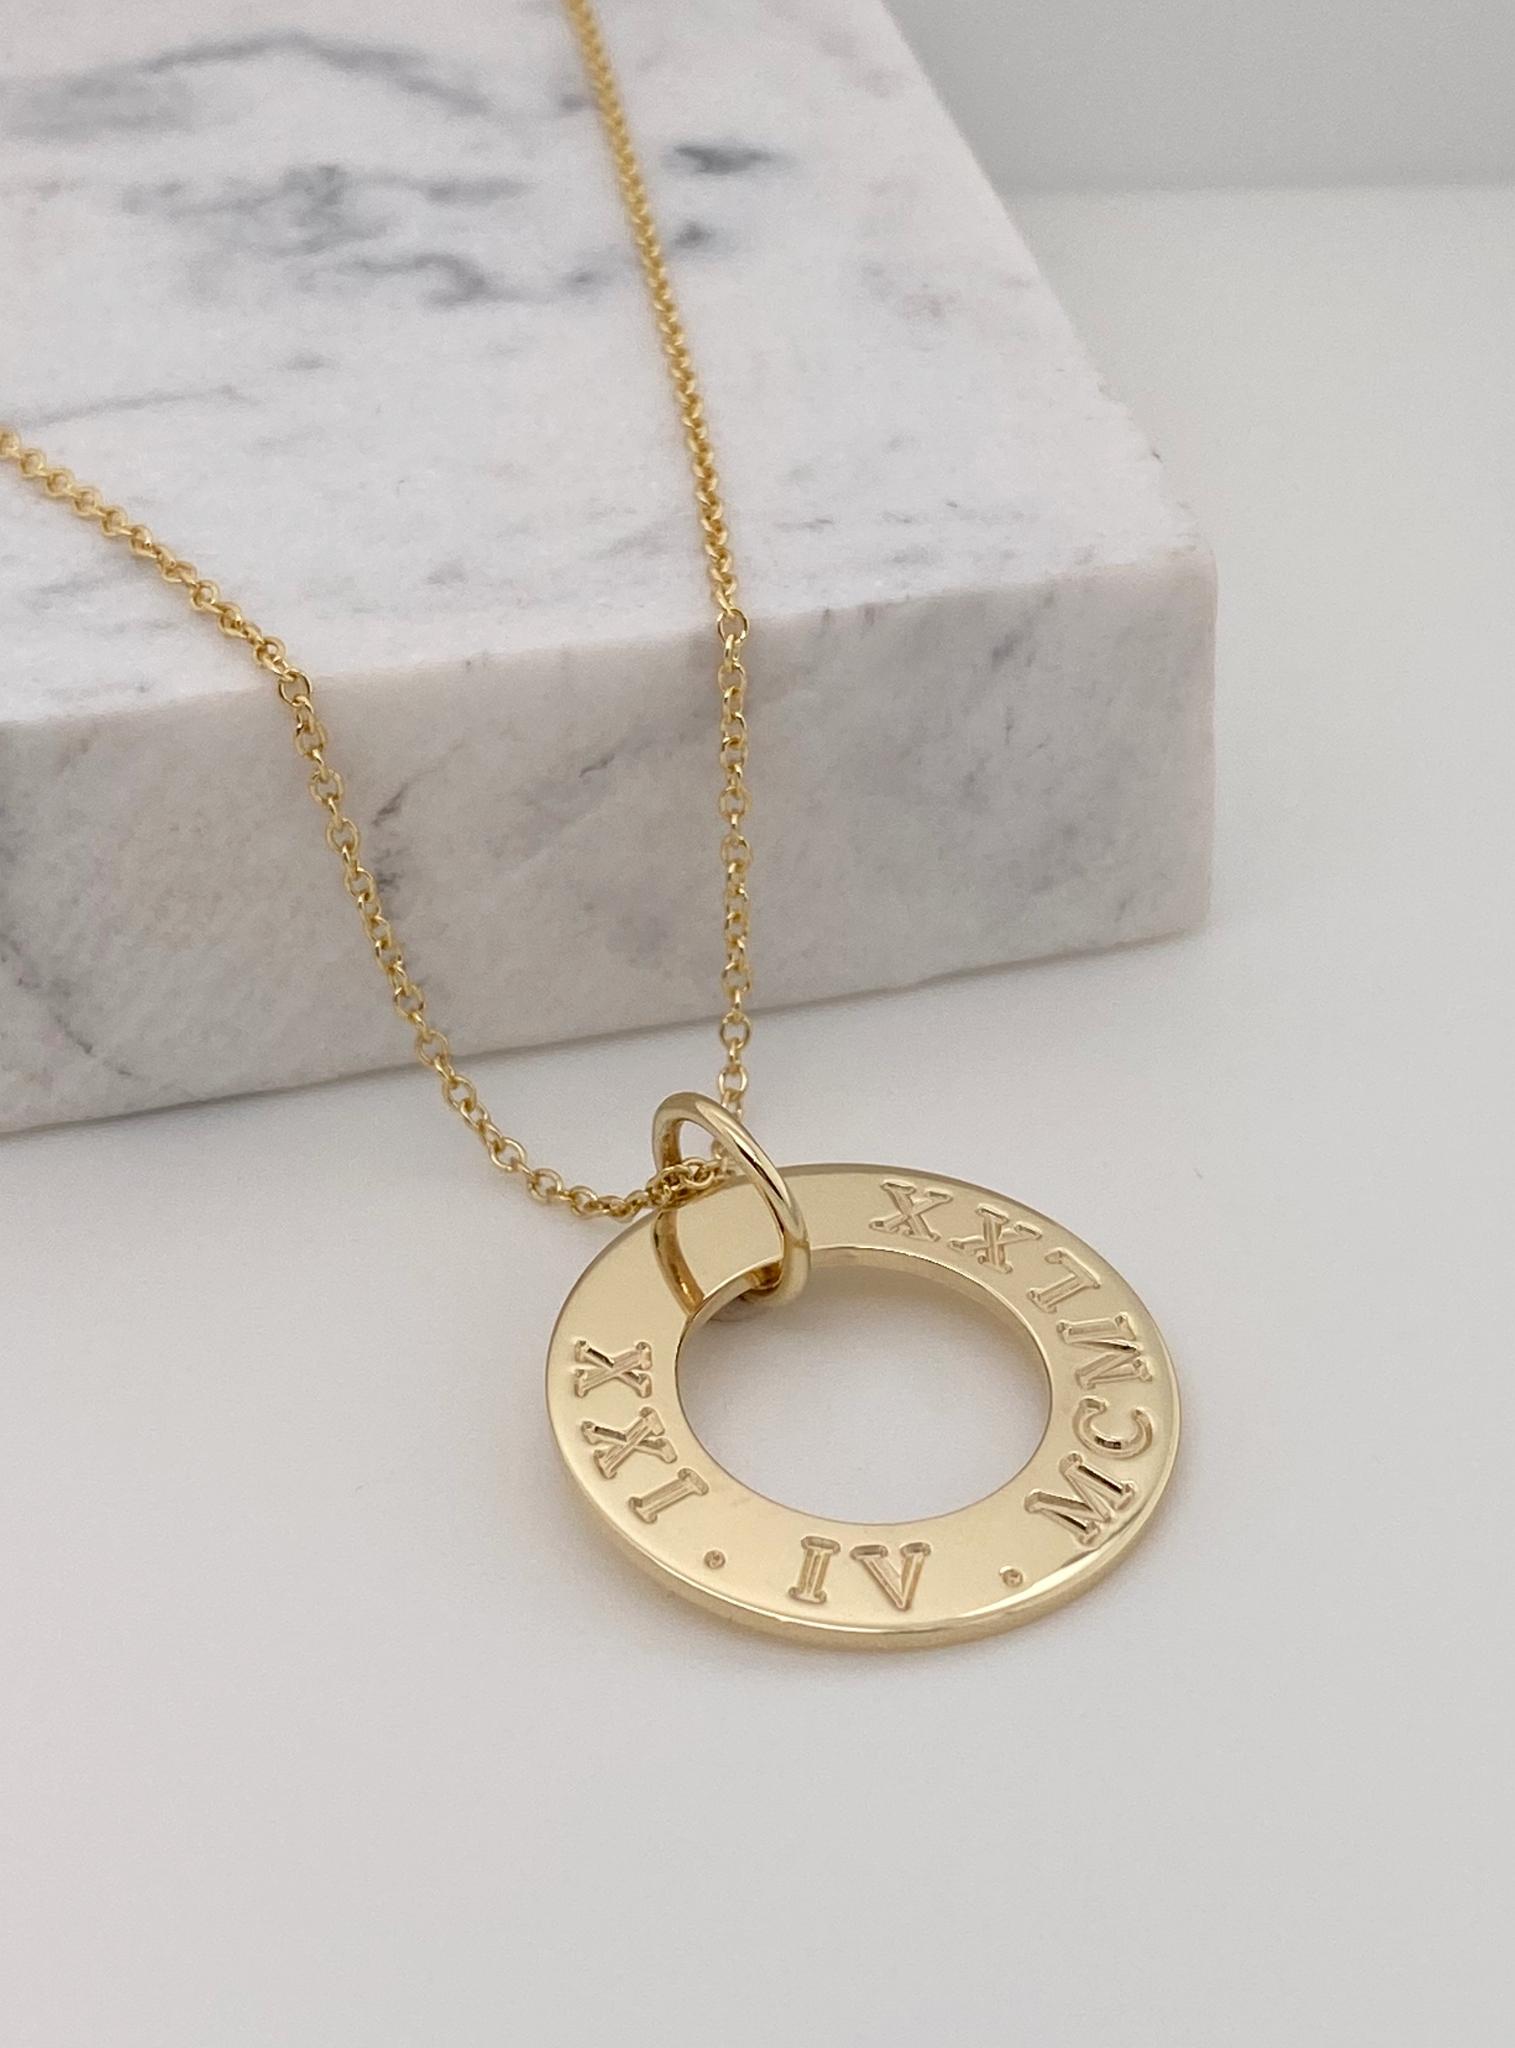 Roman Numeral Wedding Date Necklace - Personalize with Your own date –  momentcreator.com